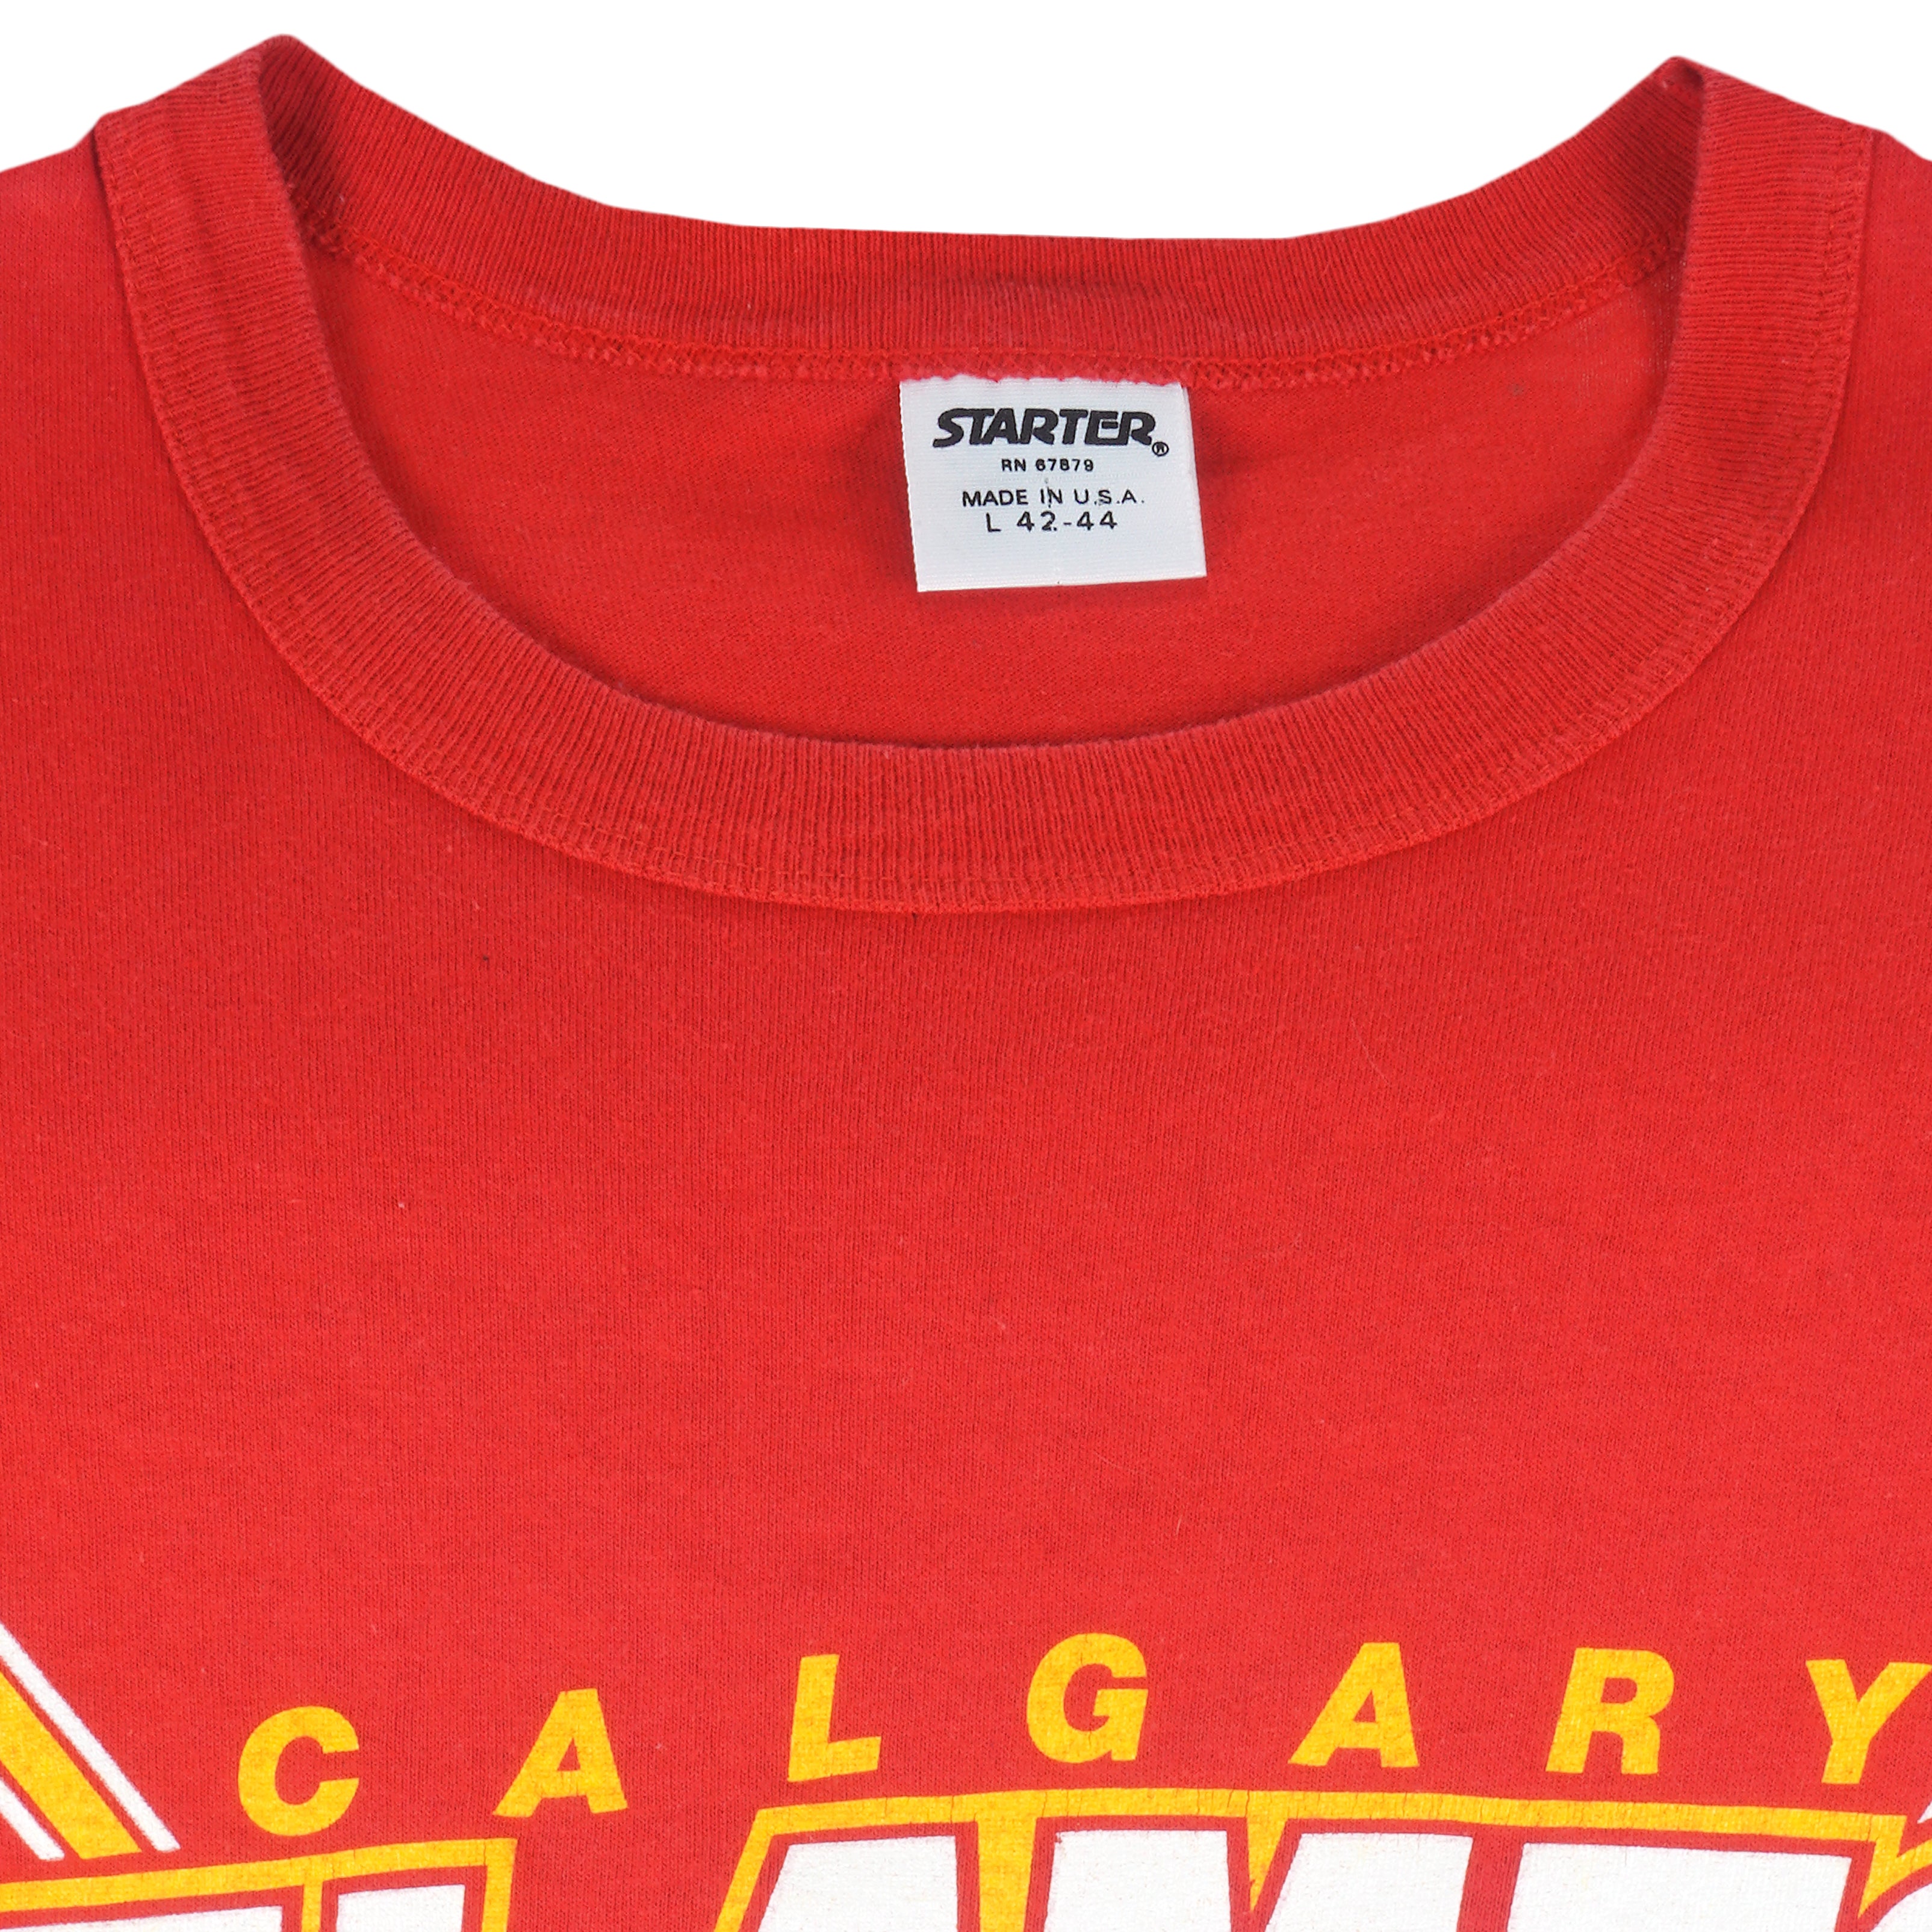 Vintage Calgary Flames Graphic T Shirt Tee Big Logo Size Large -  Canada